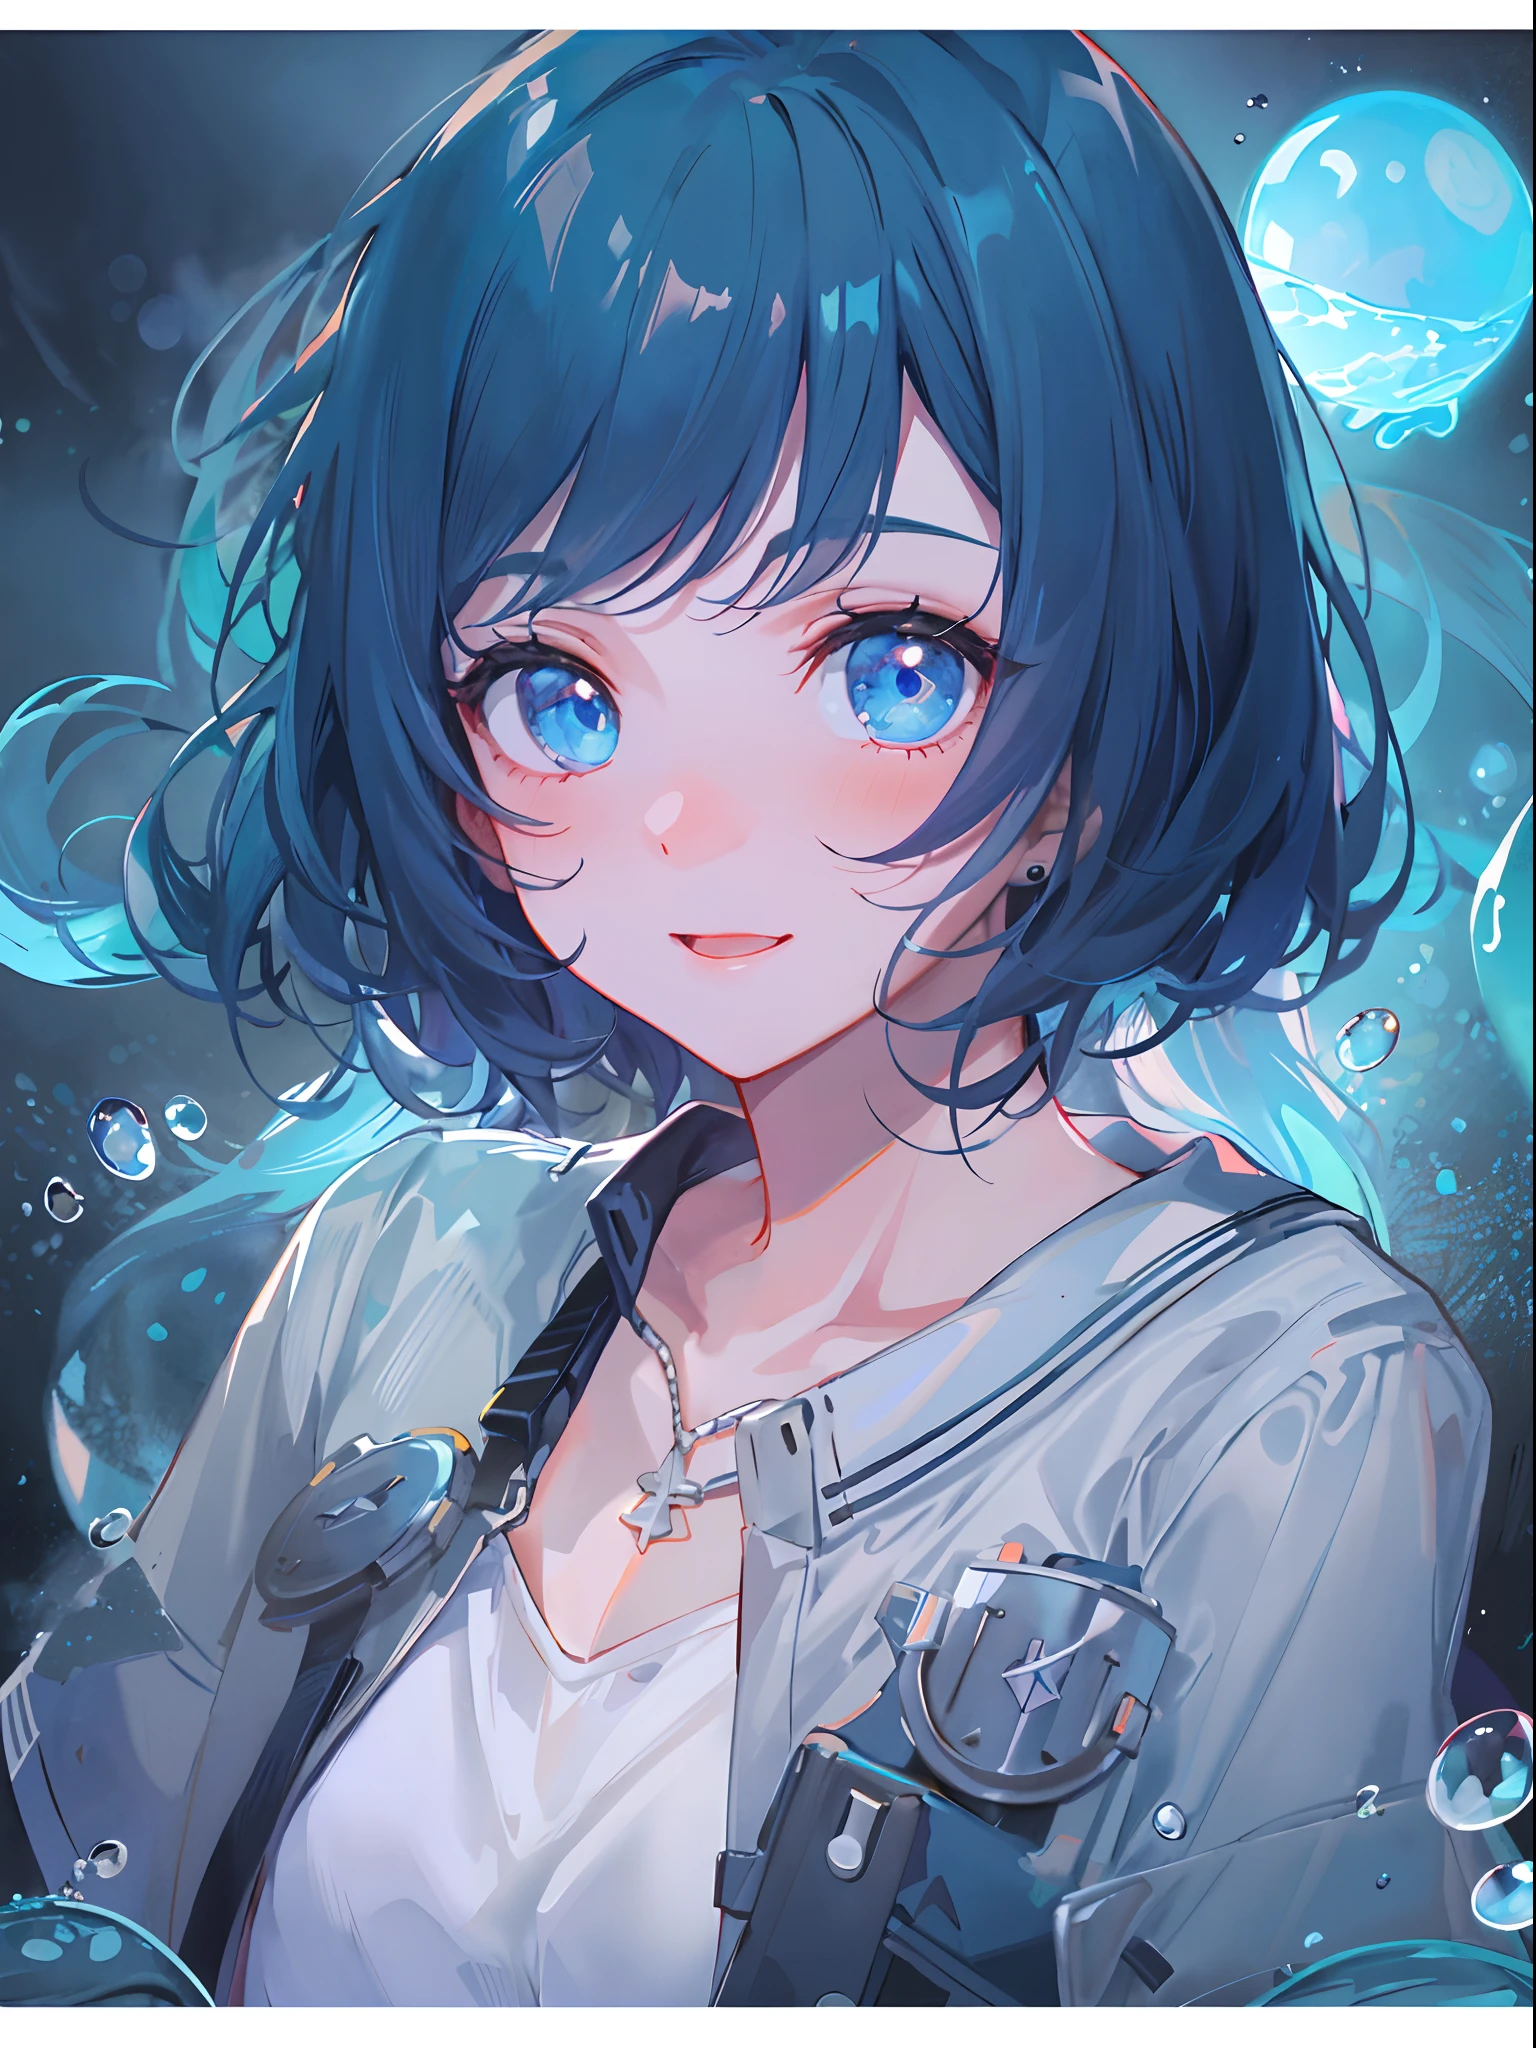 ((top-quality)), ((​masterpiece)), ((Ultra-detail)), (extremely delicate and beautiful), girl with, solo, cold attitude,((Black jacket)),She is very(relax)with  the(Settled down)Looks,A darK-haired, depth of fields,evil smile,Bubble, under the water, Air bubble,bright light blue eyes,Inner color with light blue hair and dark blue tips,Cold background,Bob Hair - Linear Art, shortpants、knee high socks、White uniform like 、Light blue ribbon ties、Clothes are sheer、Hands in pockets